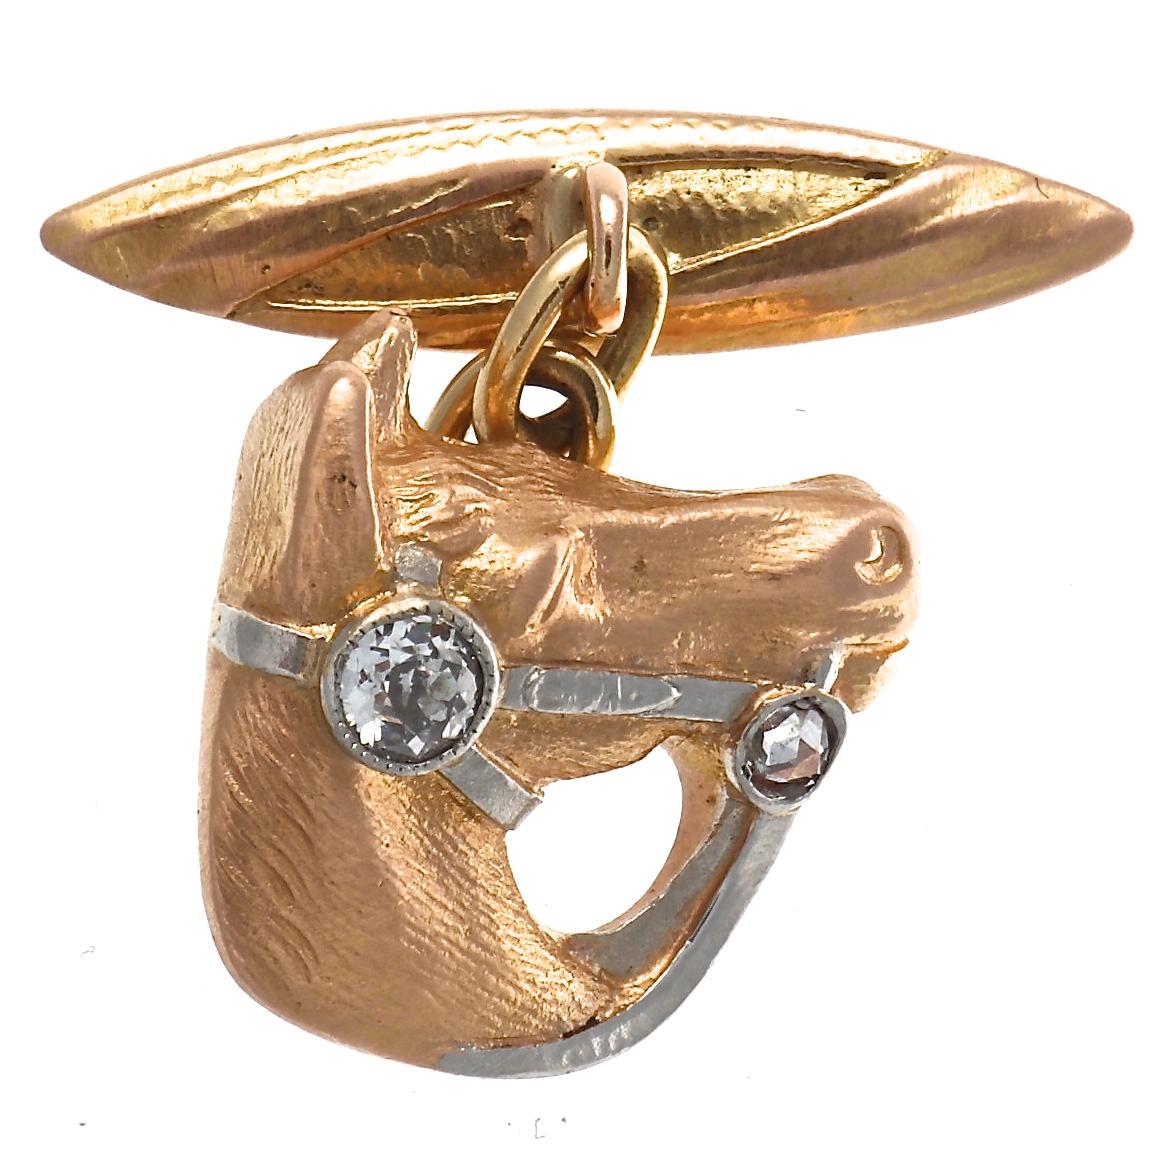 Don Corleone used a horse head to send a message. Now available to use as a fashion statement. Designed with diamonds and finely crafted 18k gold.